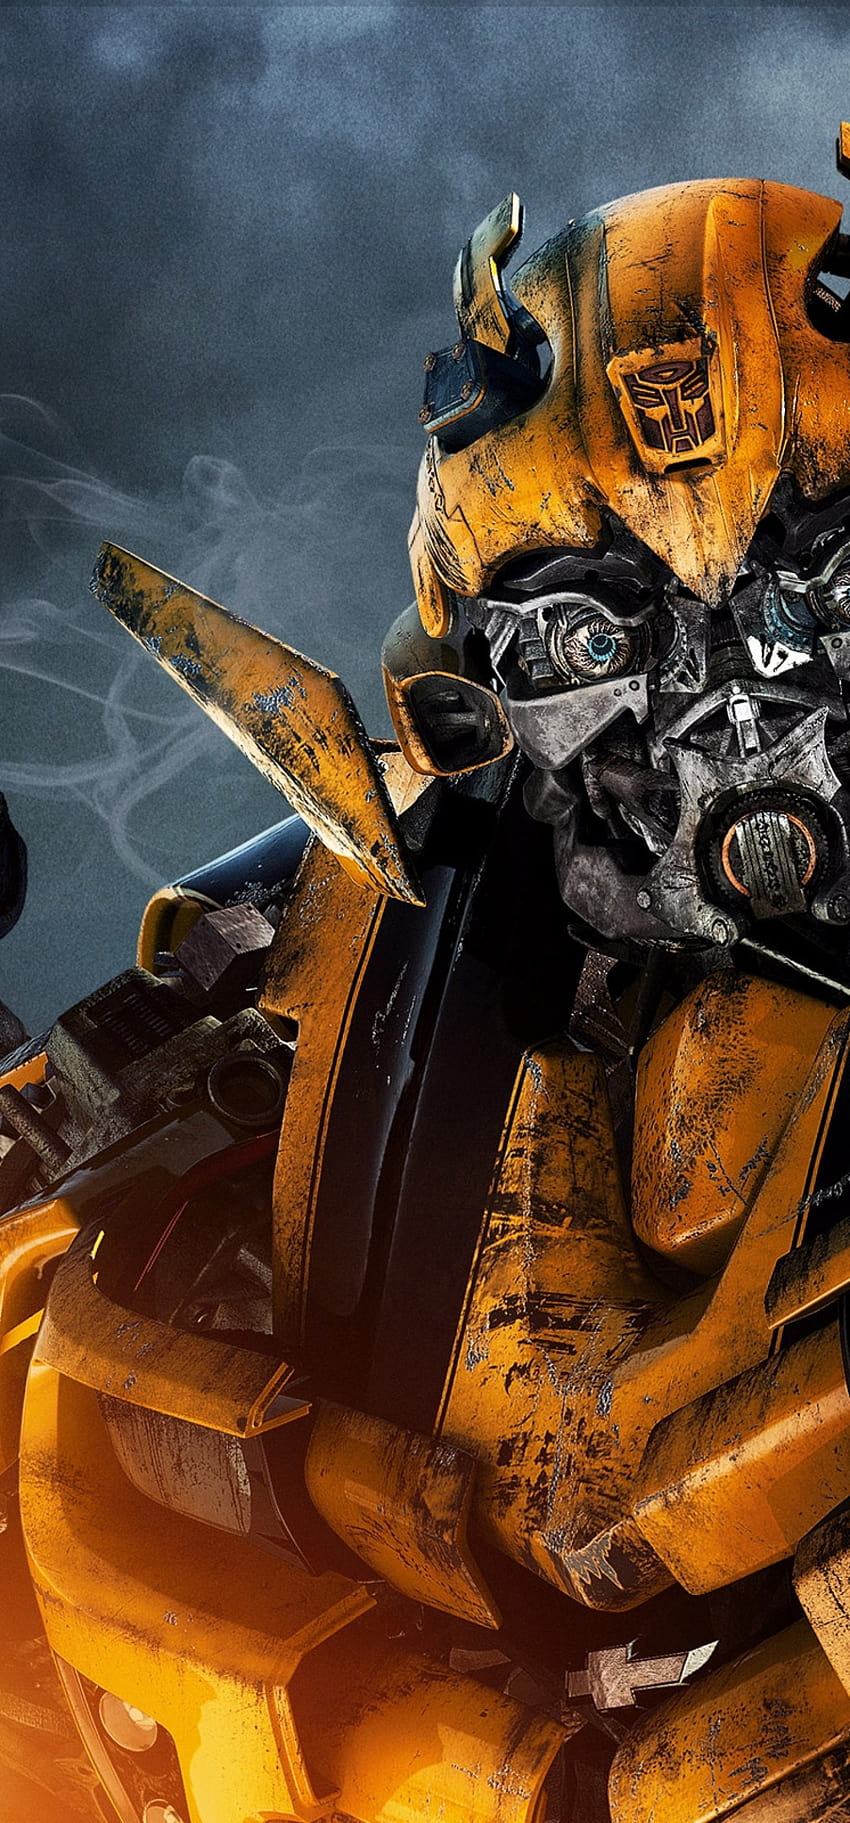 1440x3088 Transformers, Bumblebee for Samsung Galaxy Note 20 Ultra, bumblebee iphone HD phone wallpaper